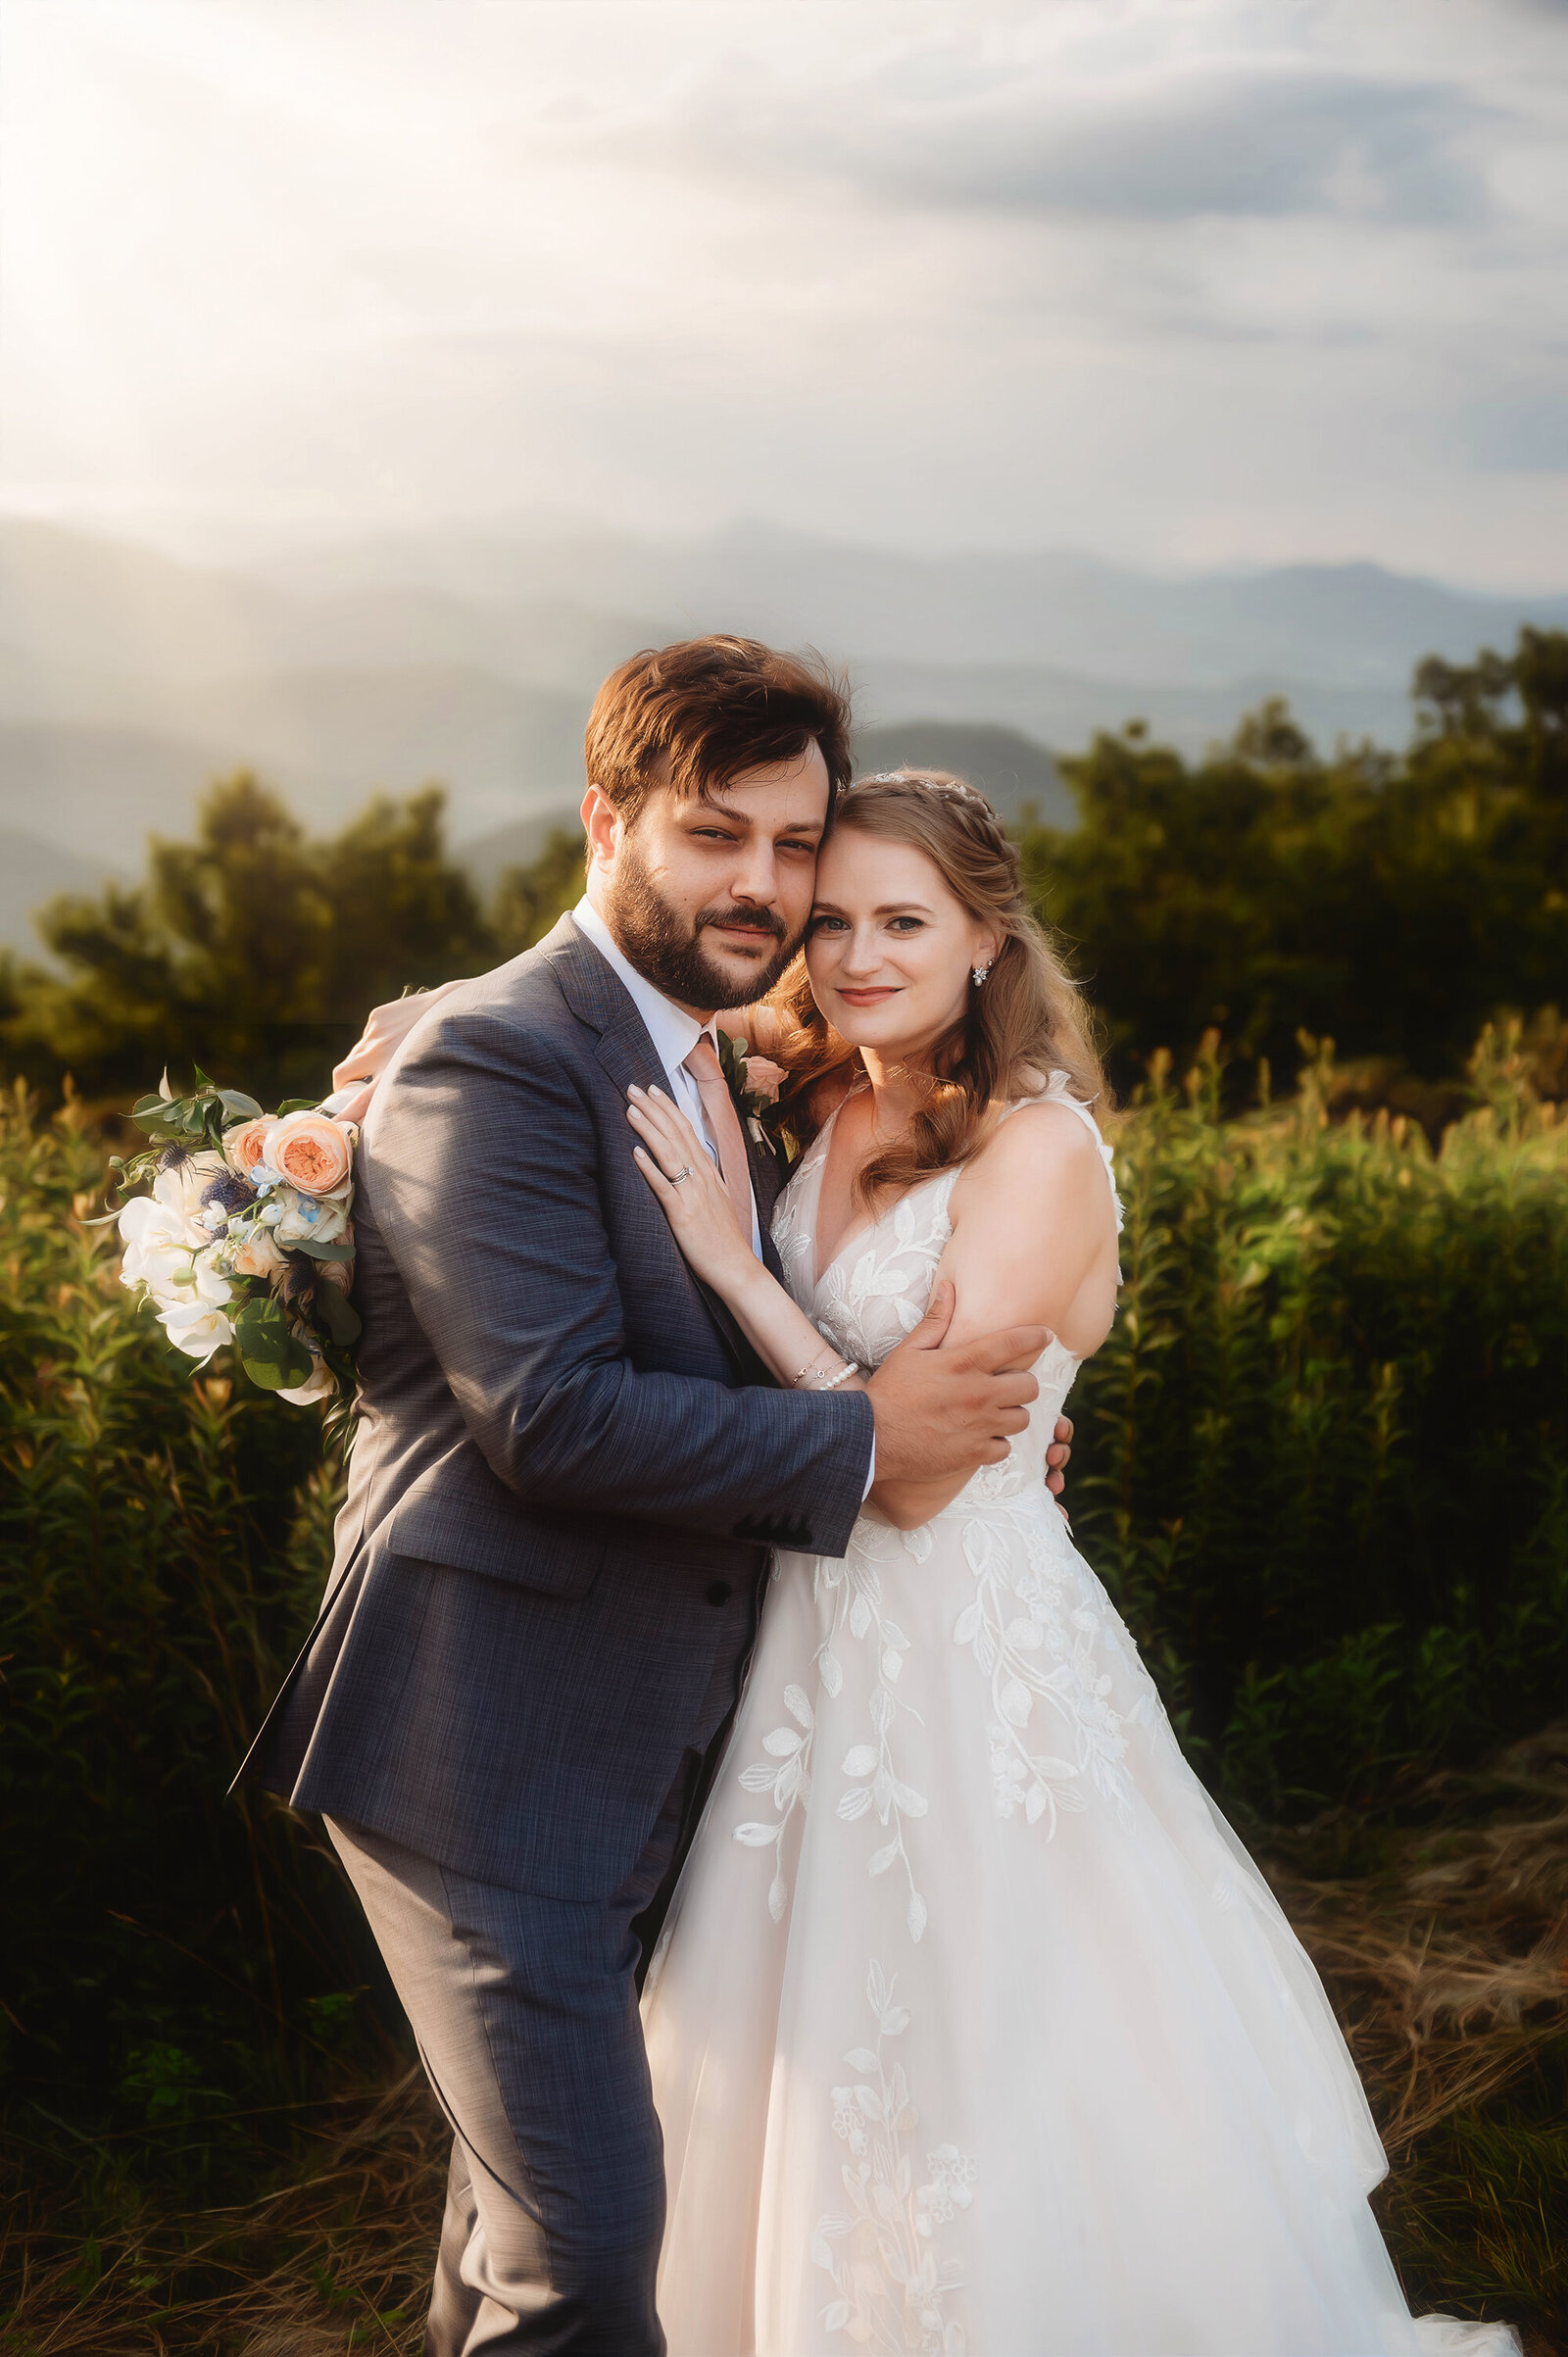 Bride and Groom embrace during their Elopement on the Blue Ridge Parkway in Asheville, NC.